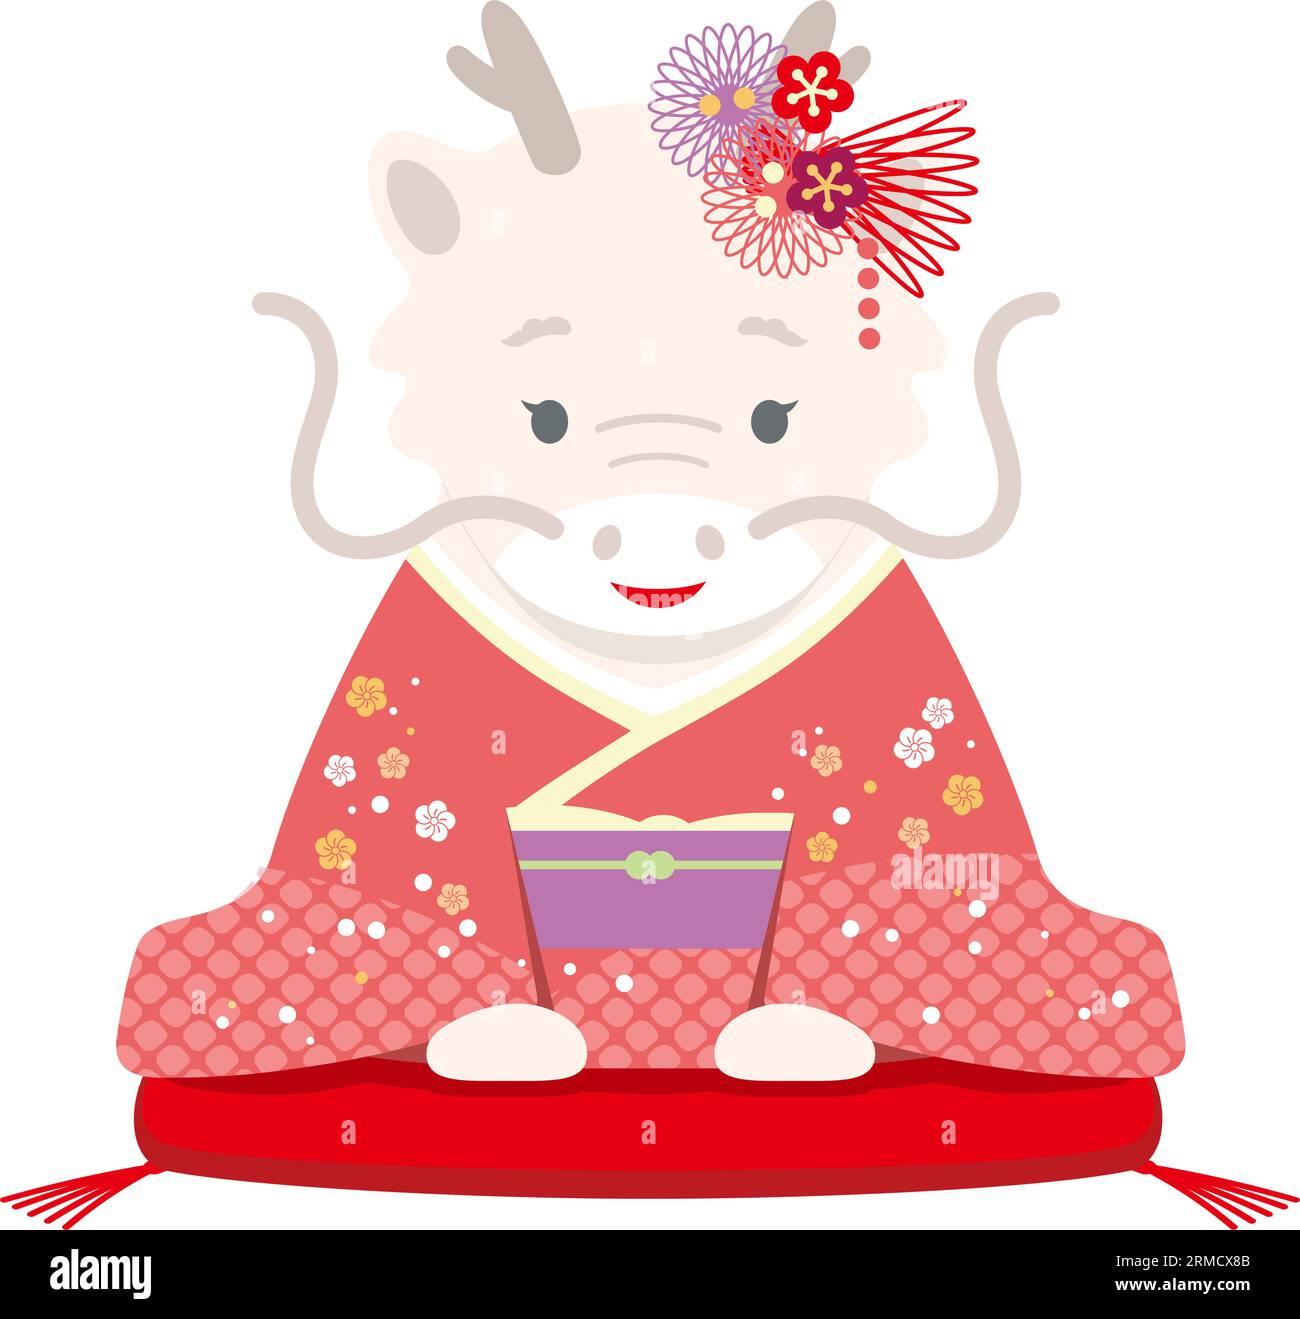 The Year Of The Dragon Mascot Dressed In Japanese Kimono Offering His/Her New Year Greetings. Vector Illustration Isolated On A White Background. Stock Vector